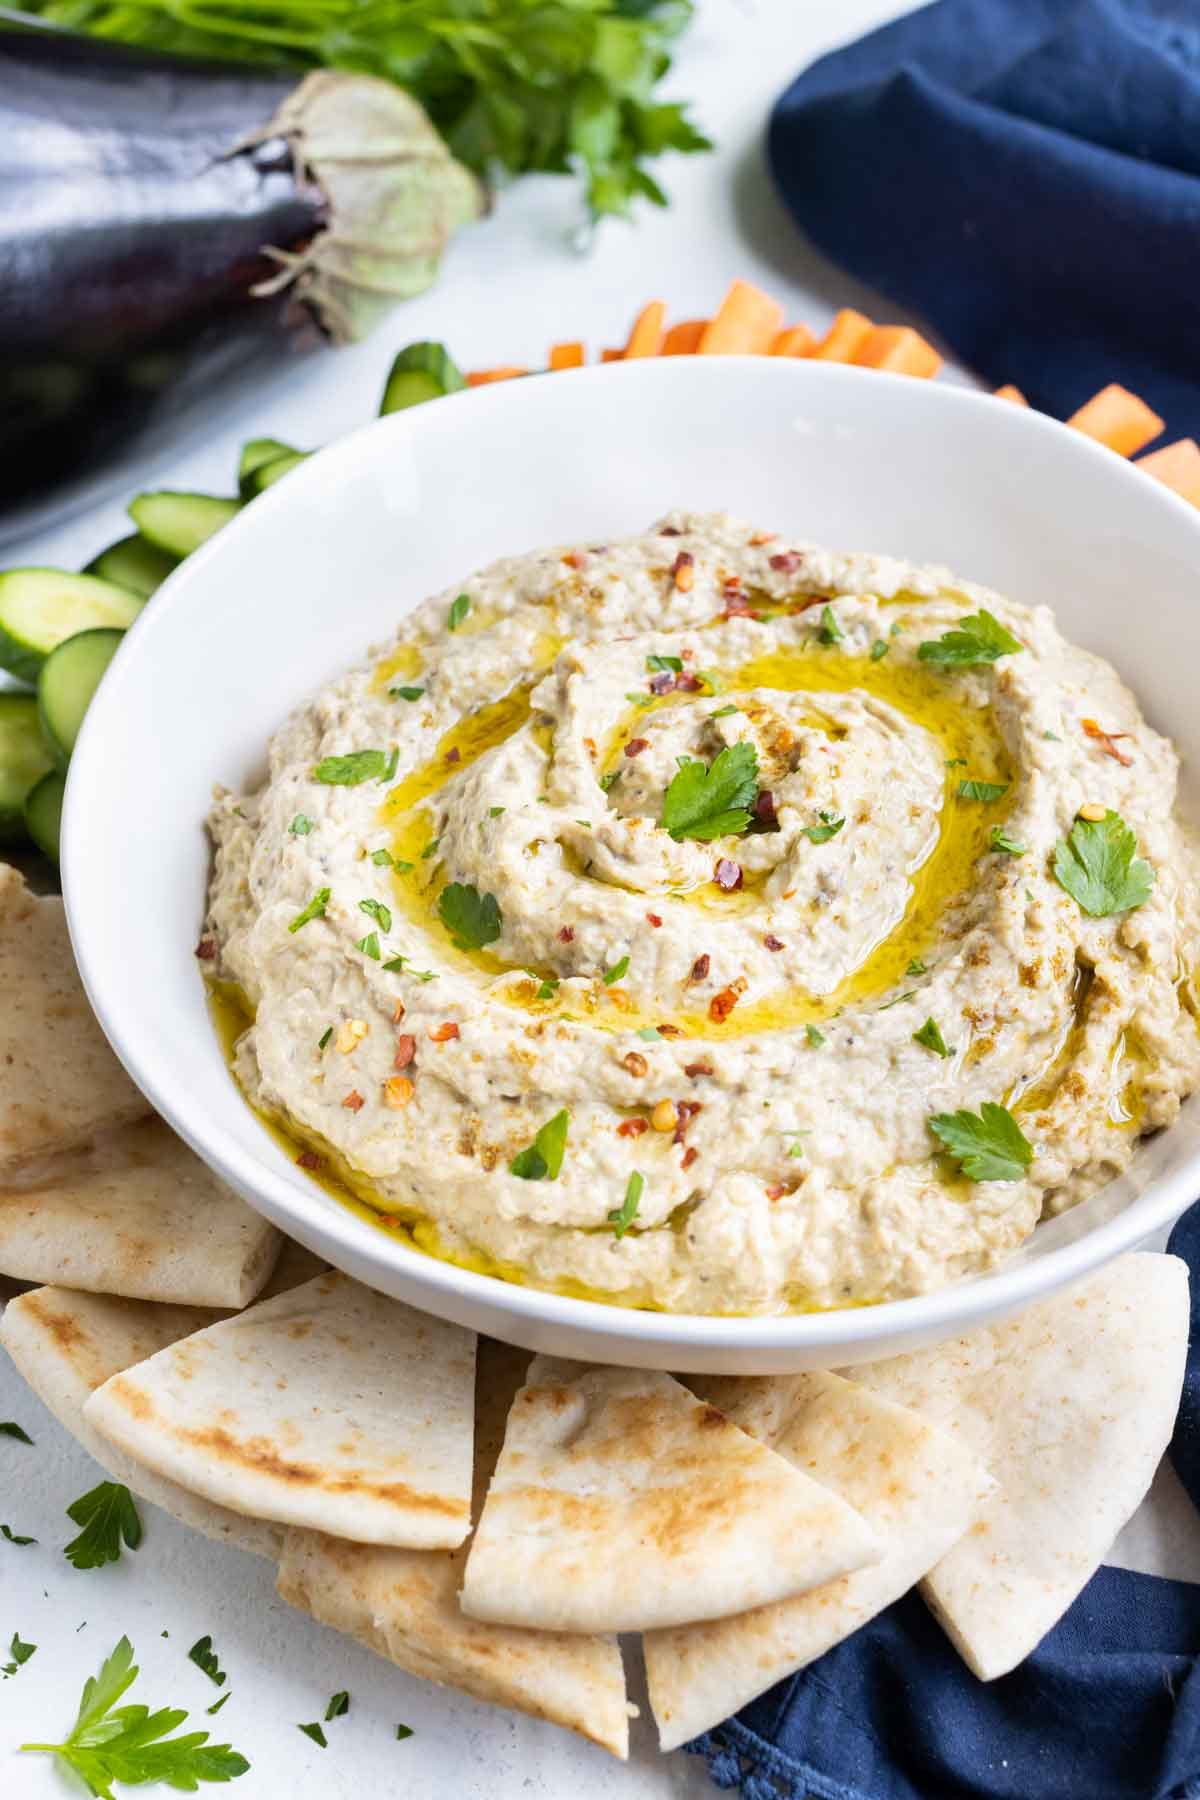 Creamy and healthy eggplant dip in a white bowl surrounded by pita and veggies.